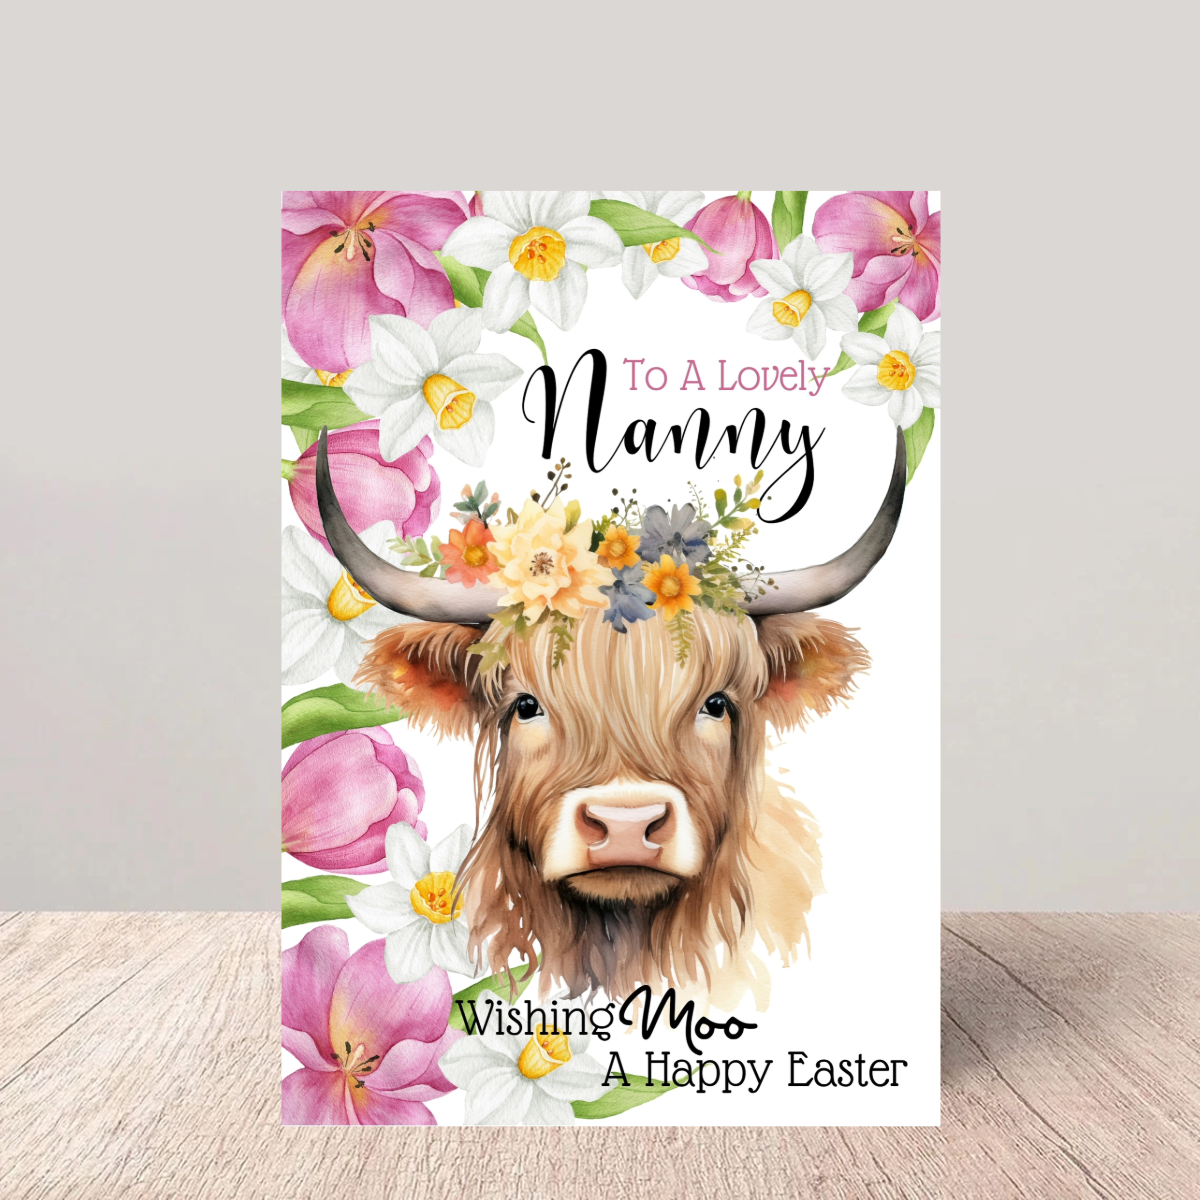 Nanny Easter Card - Floral Highland Cow Greetings Card designed by Glen Ogal